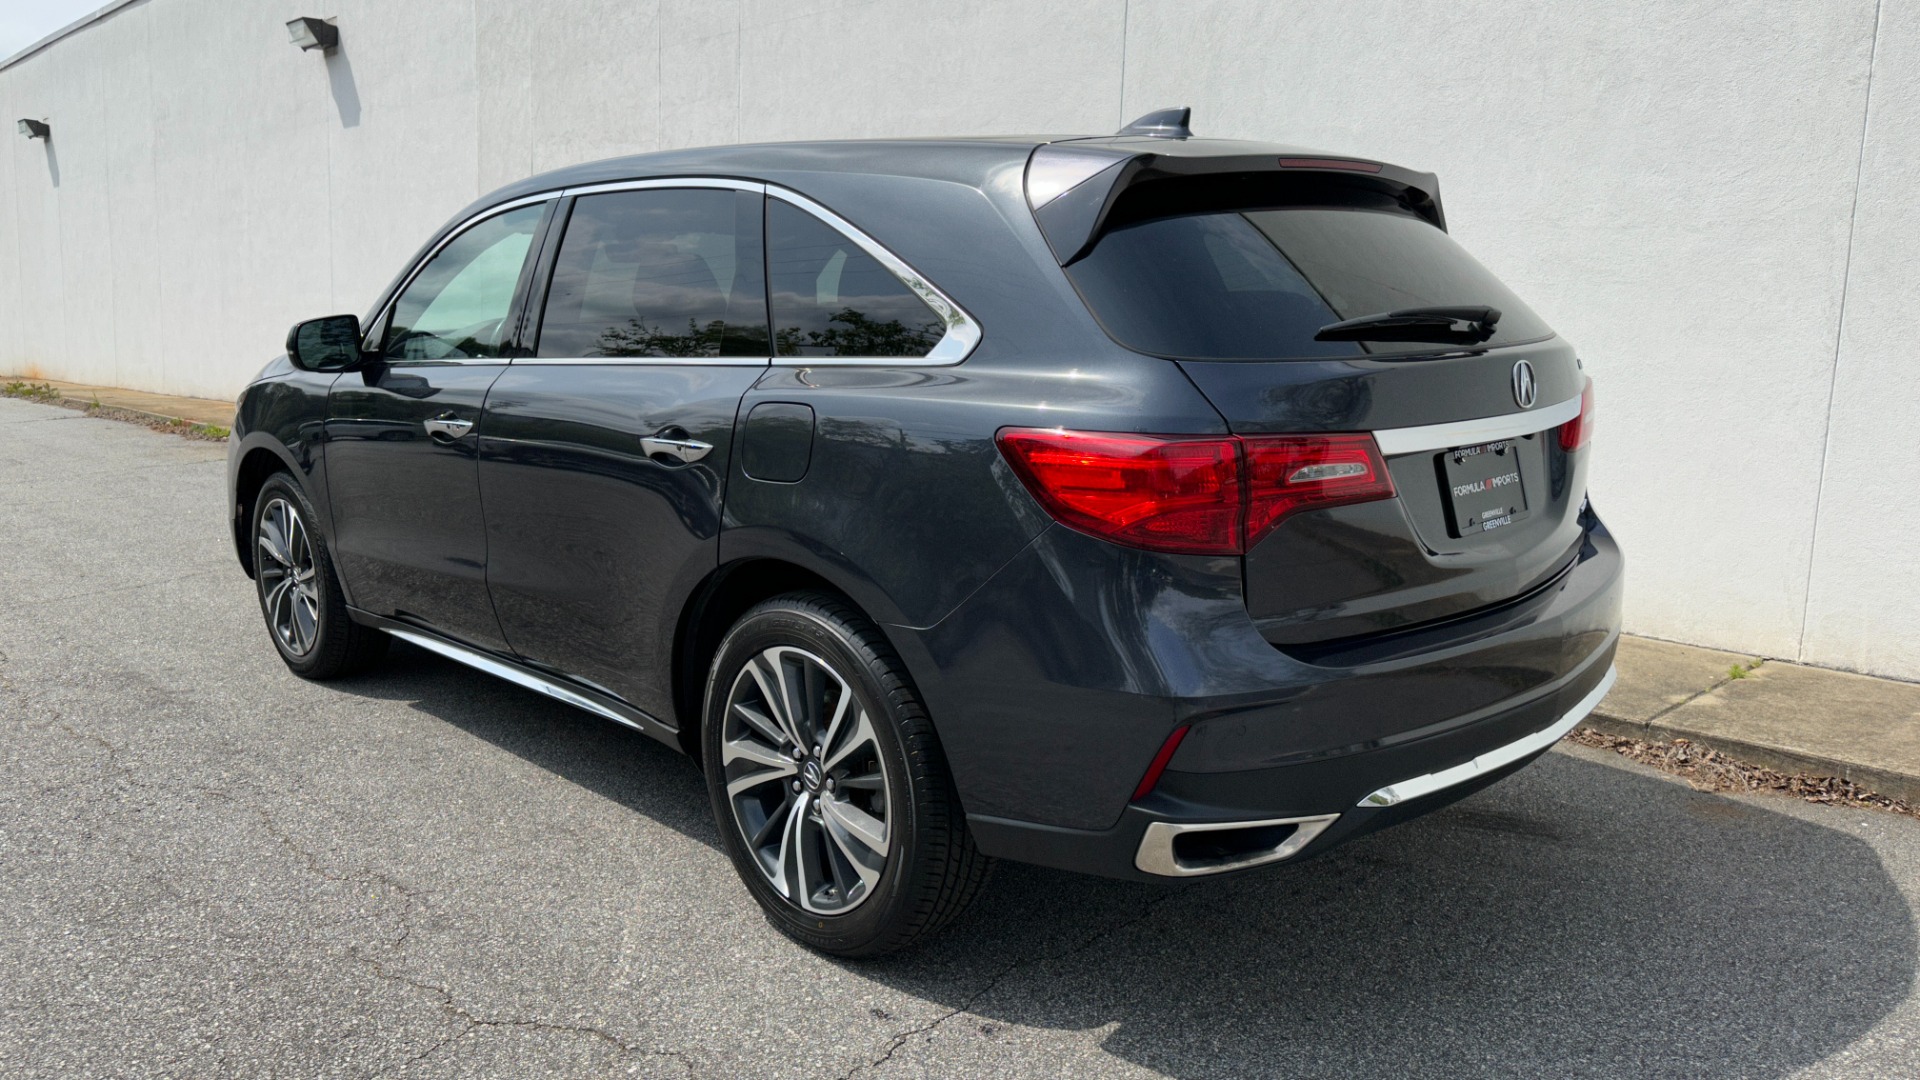 Used 2020 Acura MDX TECHNOLOGY PACKAGE / NAV / BACKUP CAM / SAFETY ASSIST / 3RD ROW / SUNROOF for sale $36,495 at Formula Imports in Charlotte NC 28227 4